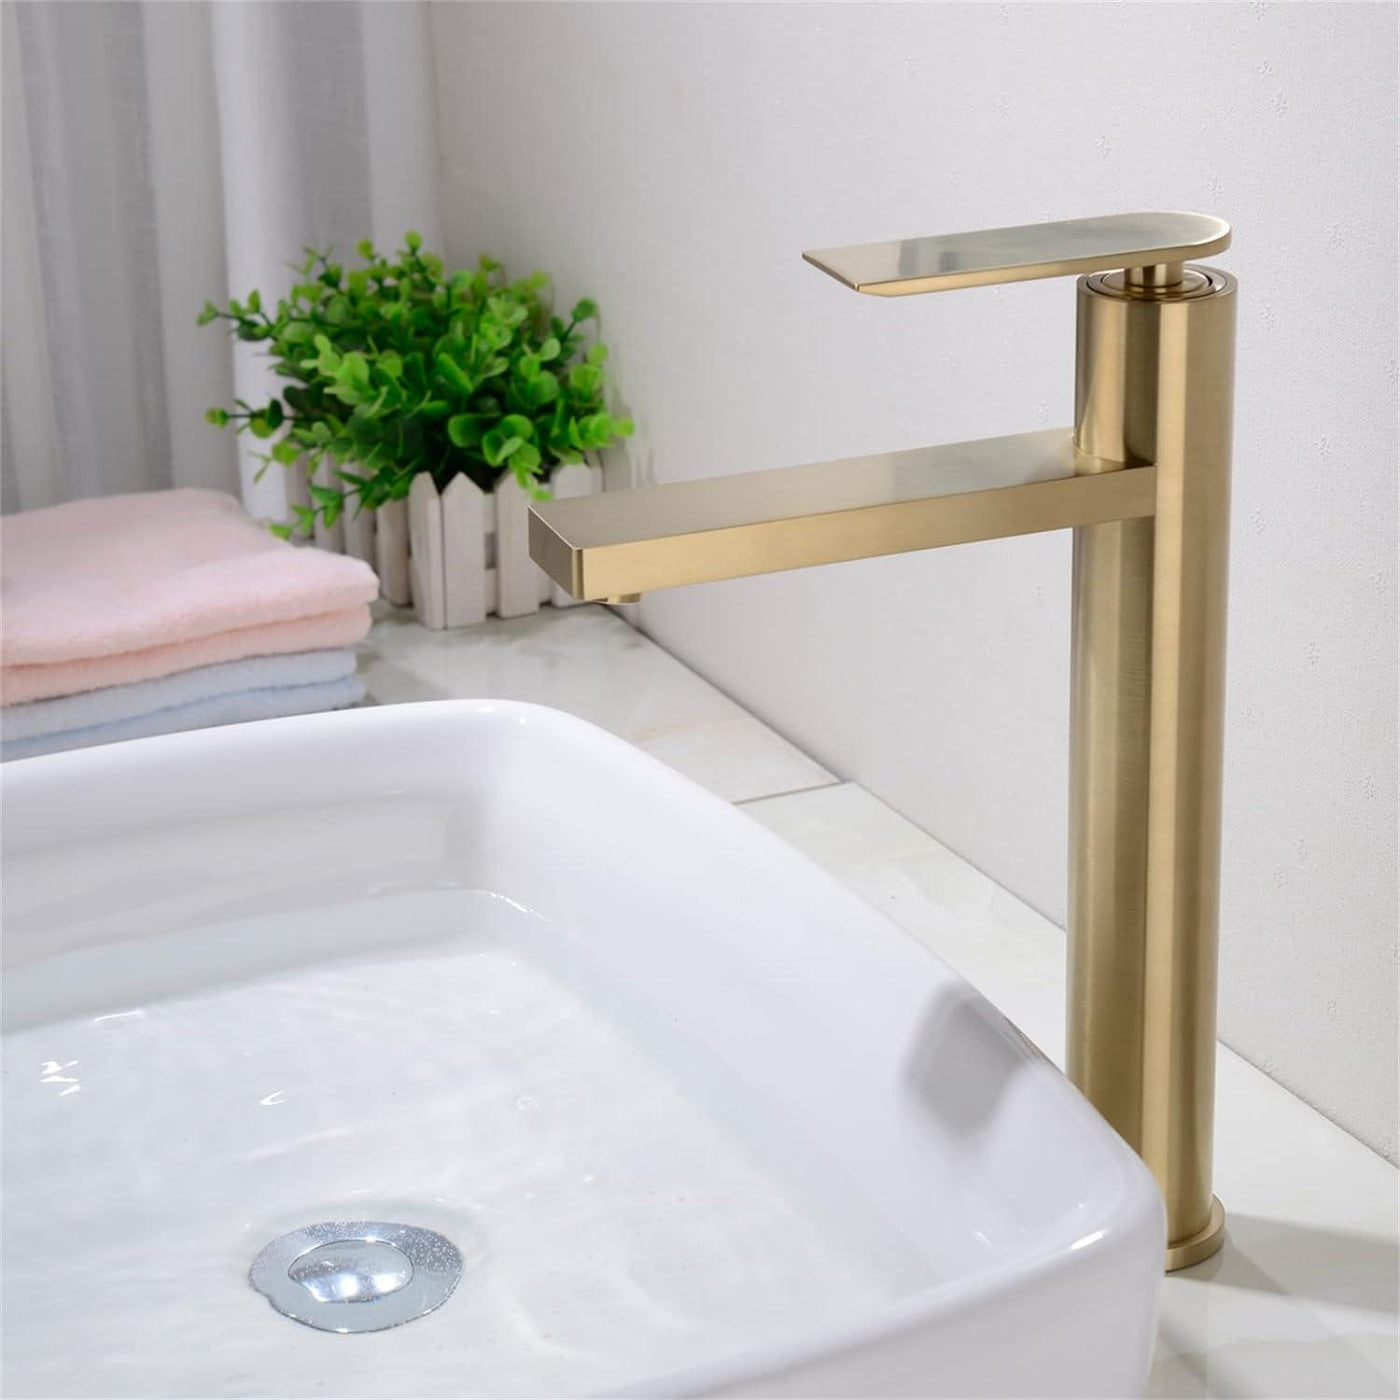 Bathroom Basin Sink Mixer Faucet, Brass Deck Mounted Single Lever Brushed Gold - Massive Discounts